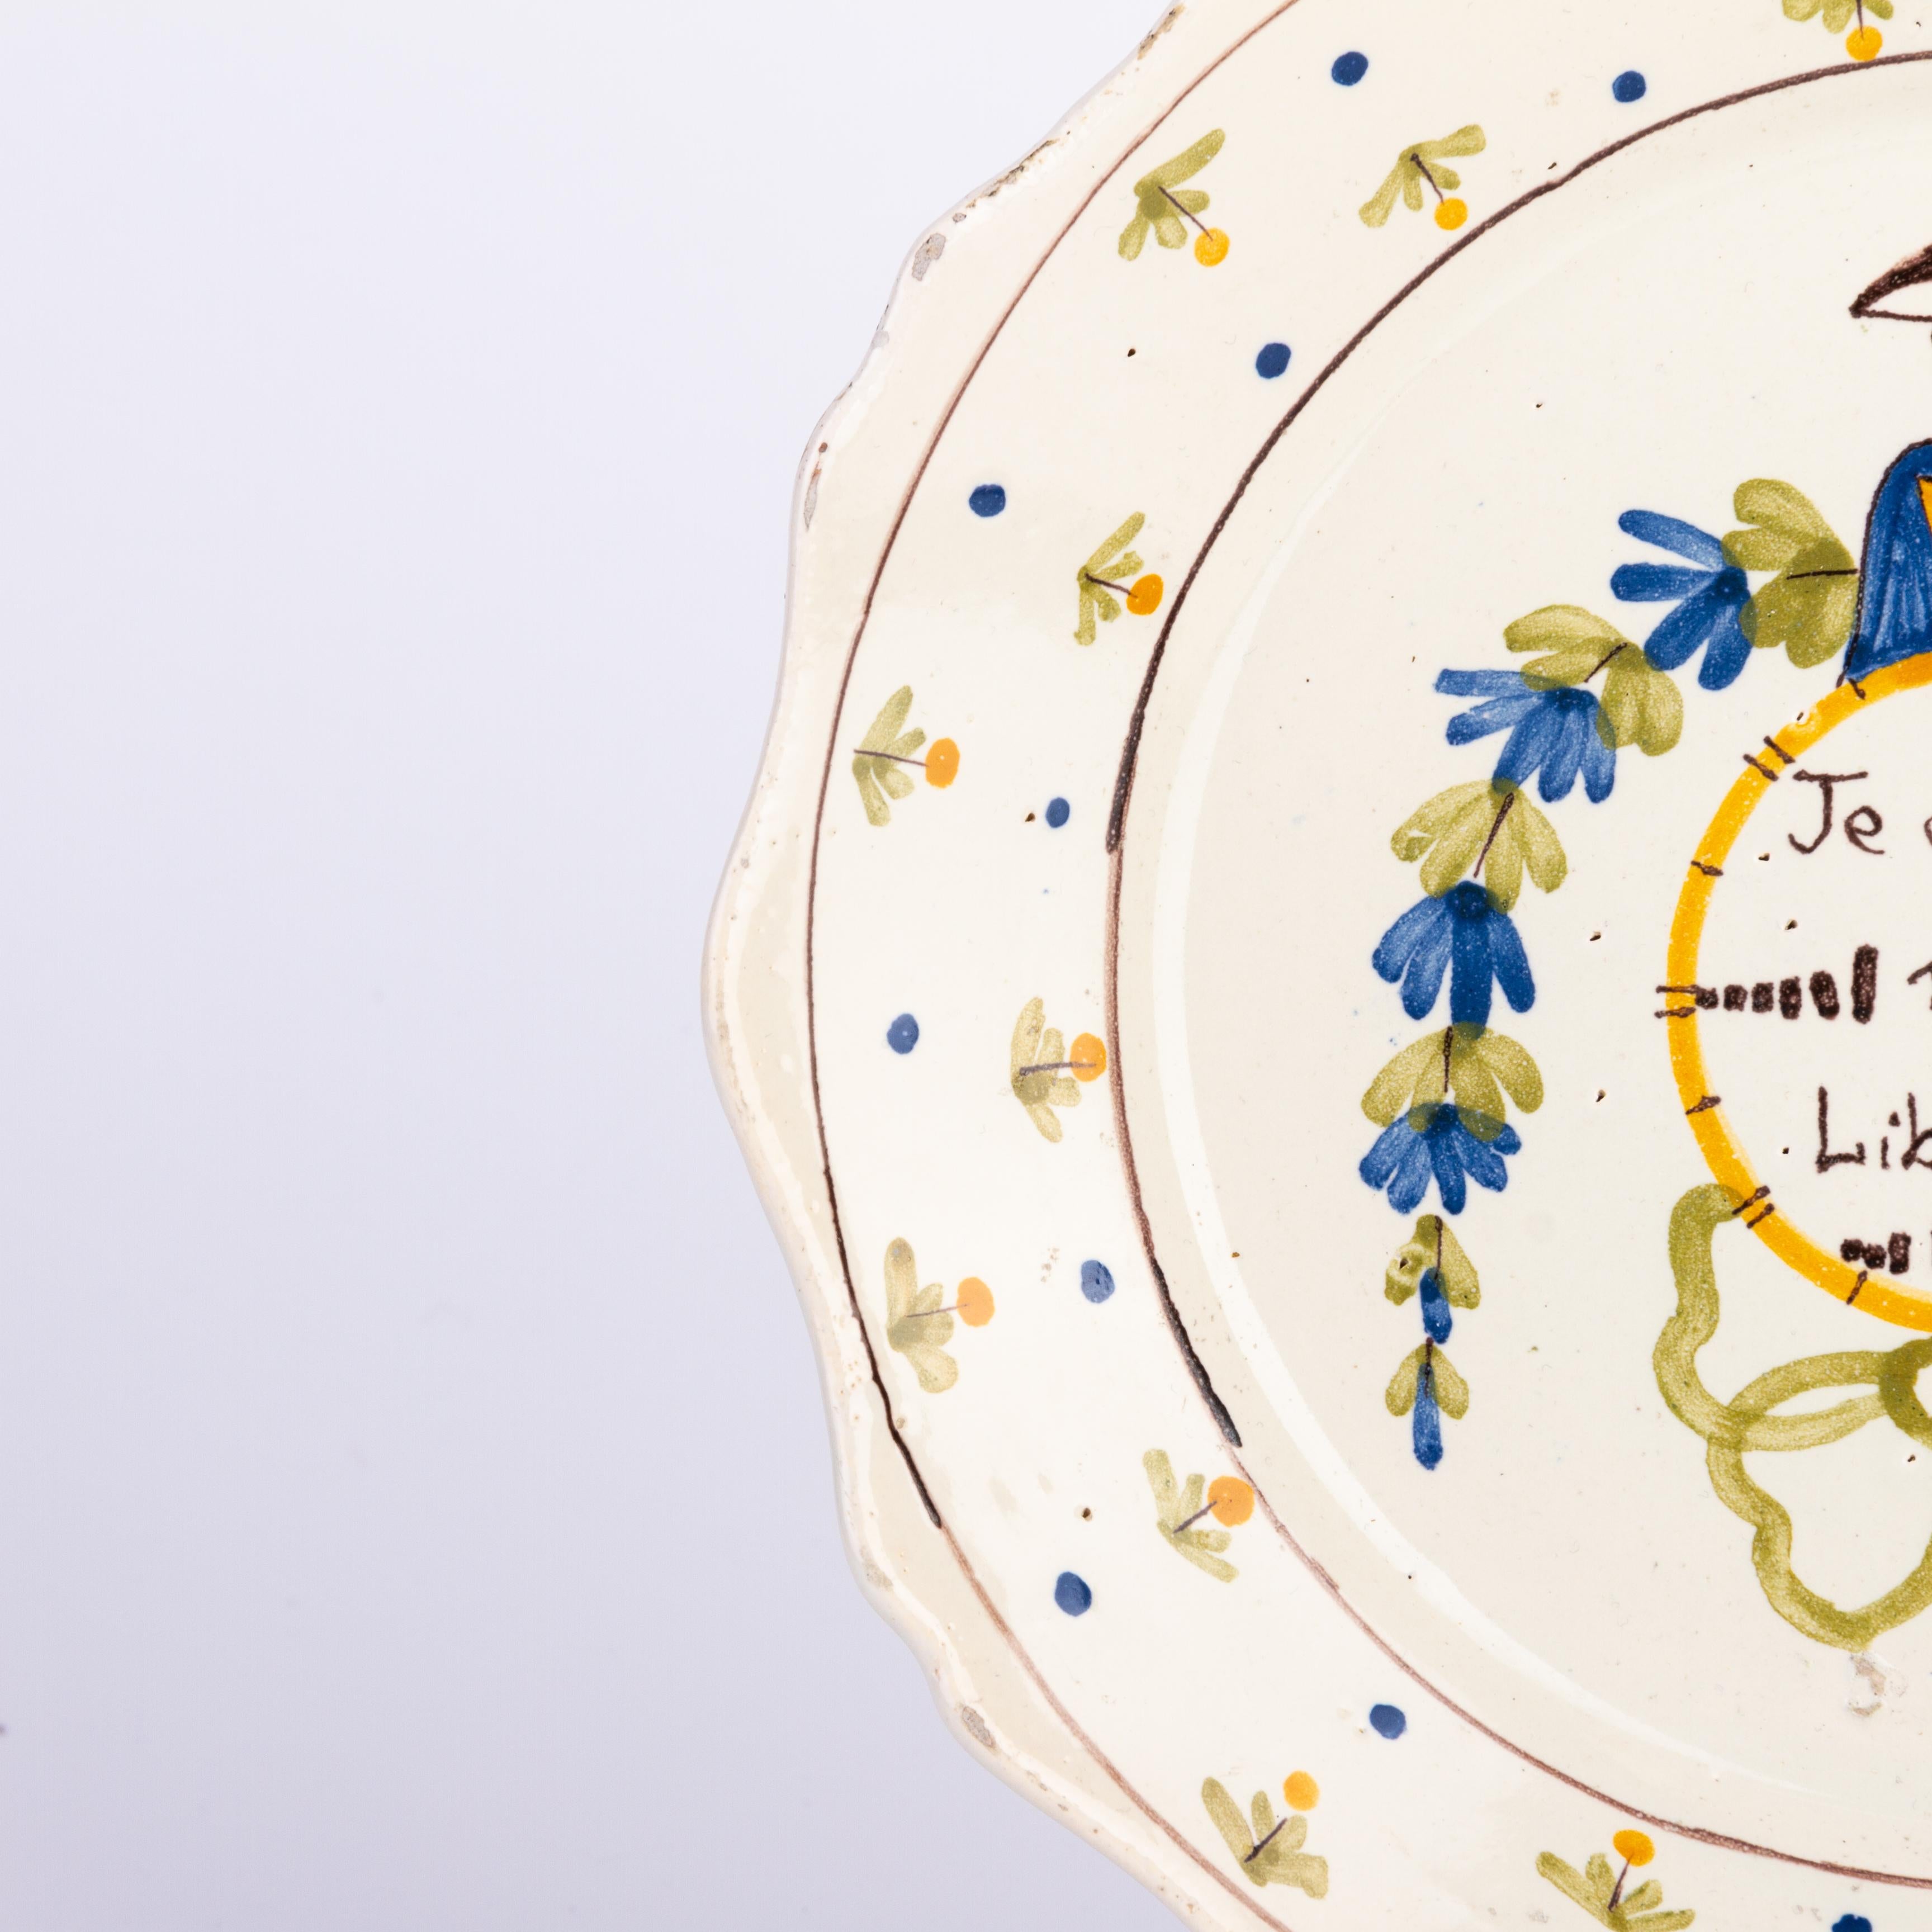 Polychromed 18th Century Nevers French Revolution Polychrome Tin-Glazed Faience Plate  For Sale